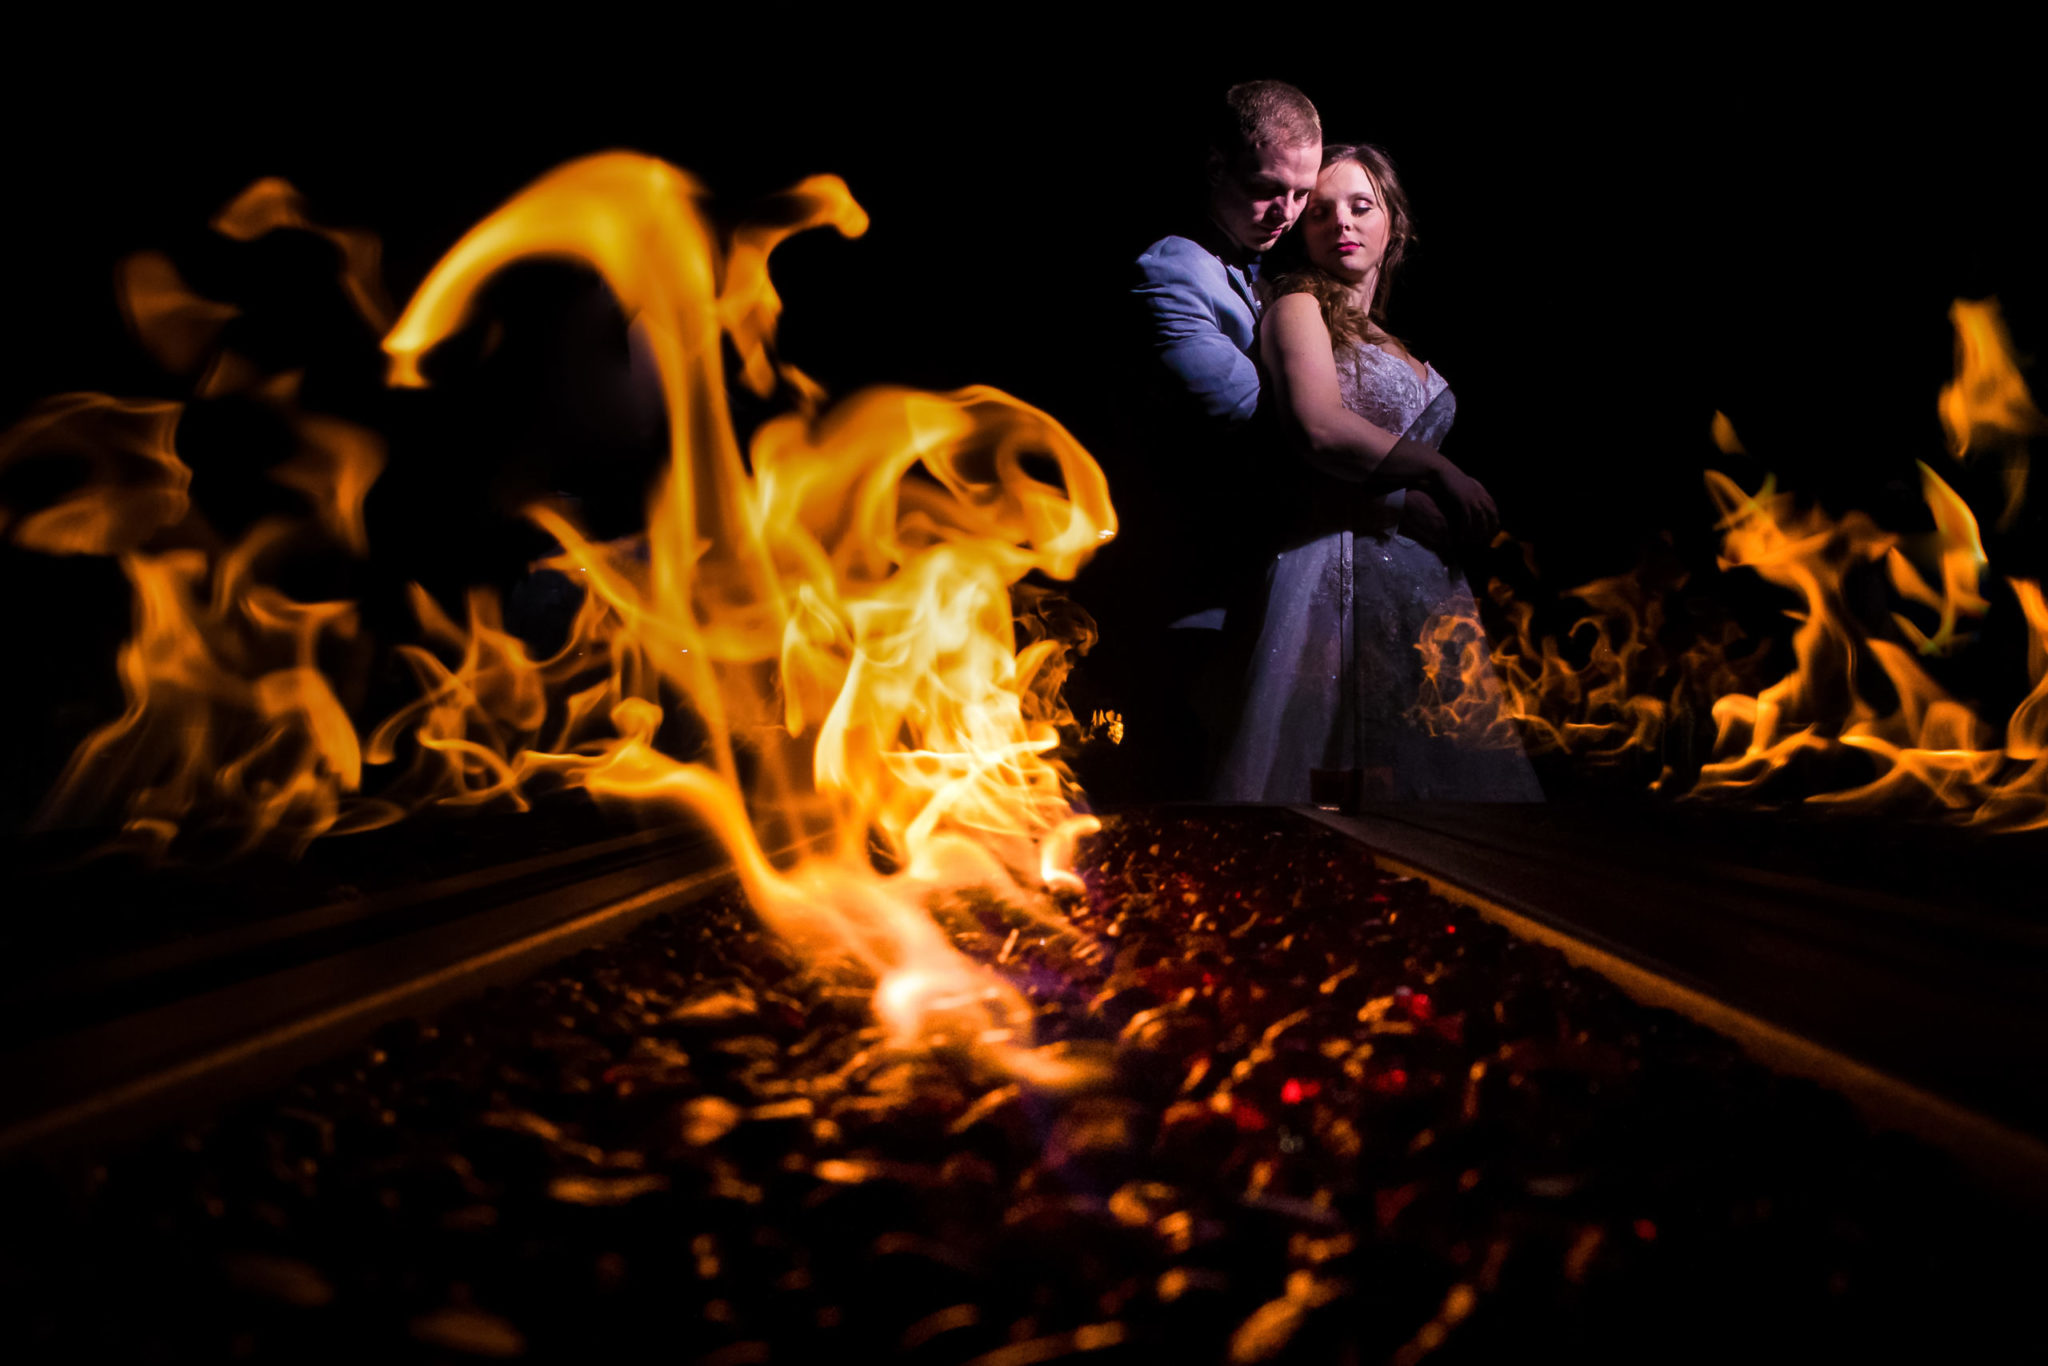 Creative NJ Wedding Photographer, Lisa Rhinehart, captures this creative, unique image of the couple embracing one another as the fire surrounds them outside of the Palace at Somerset Park